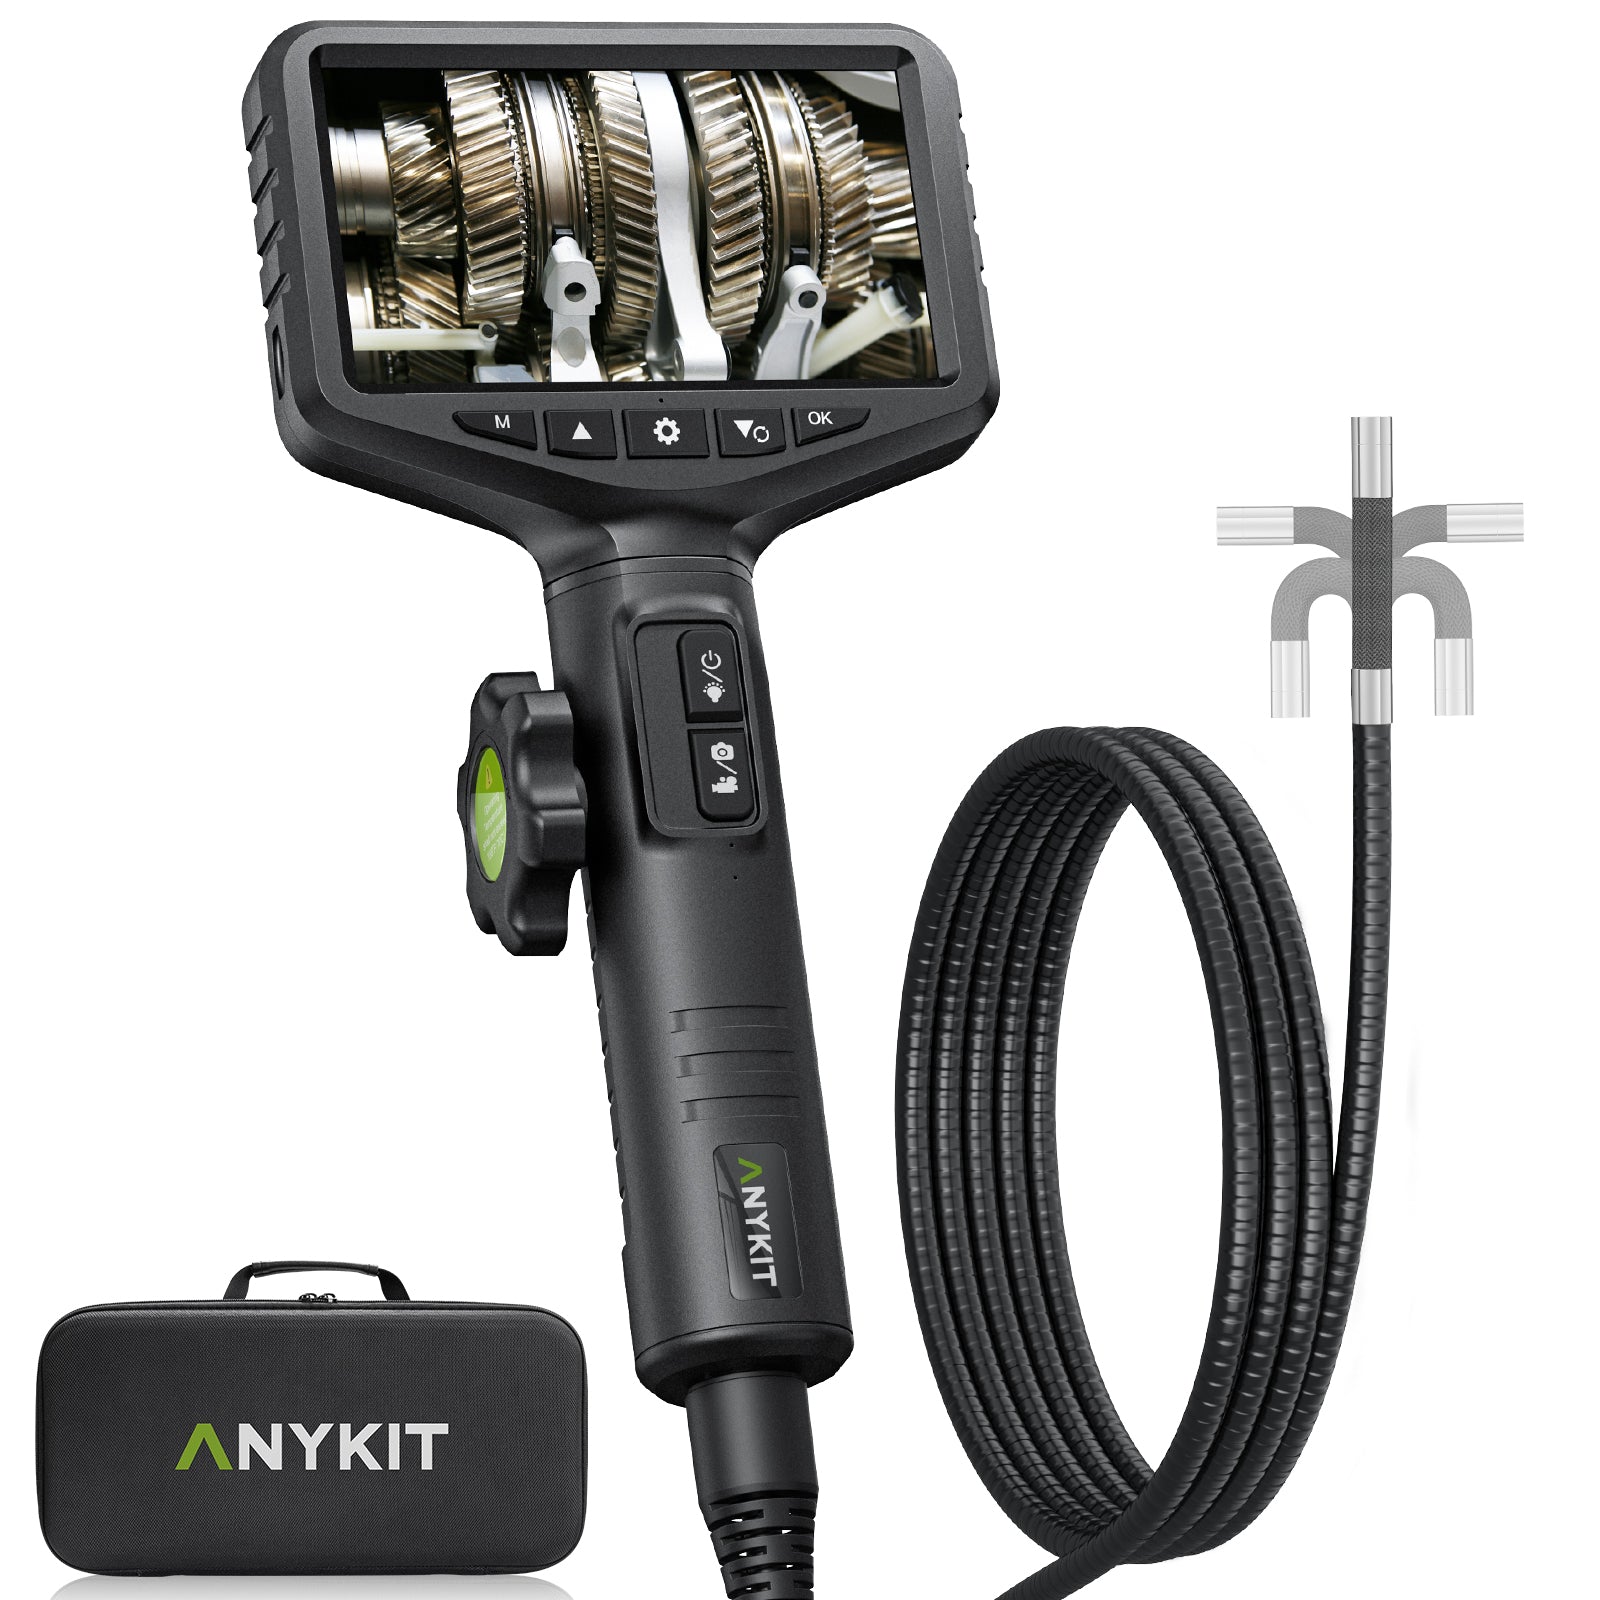 Anykit Two-Way Articulating Borescope, 2MP Industrial Endoscope, 5" IPS Screen Inspection Camera with 6 Adjustable LEDs,IP67 Waterproof Snake Camera with 5.08ft Semi-Rigid Cable